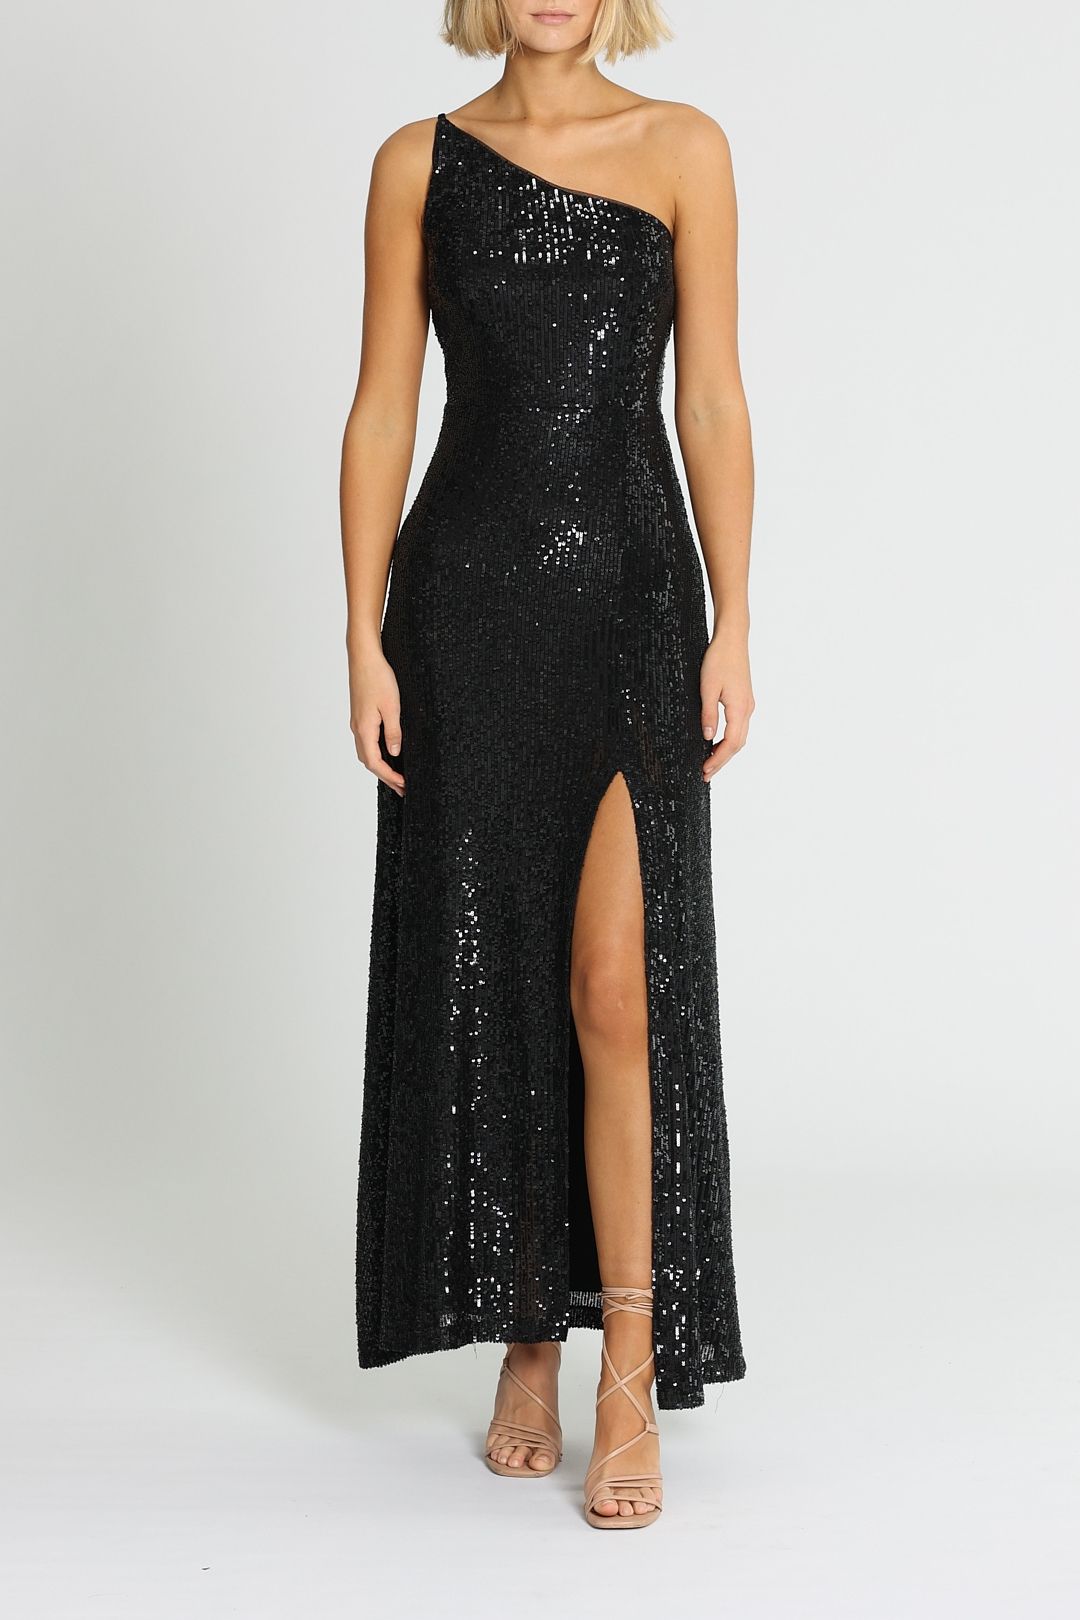 Nookie - Shine Gown - Black < ONS Boutique